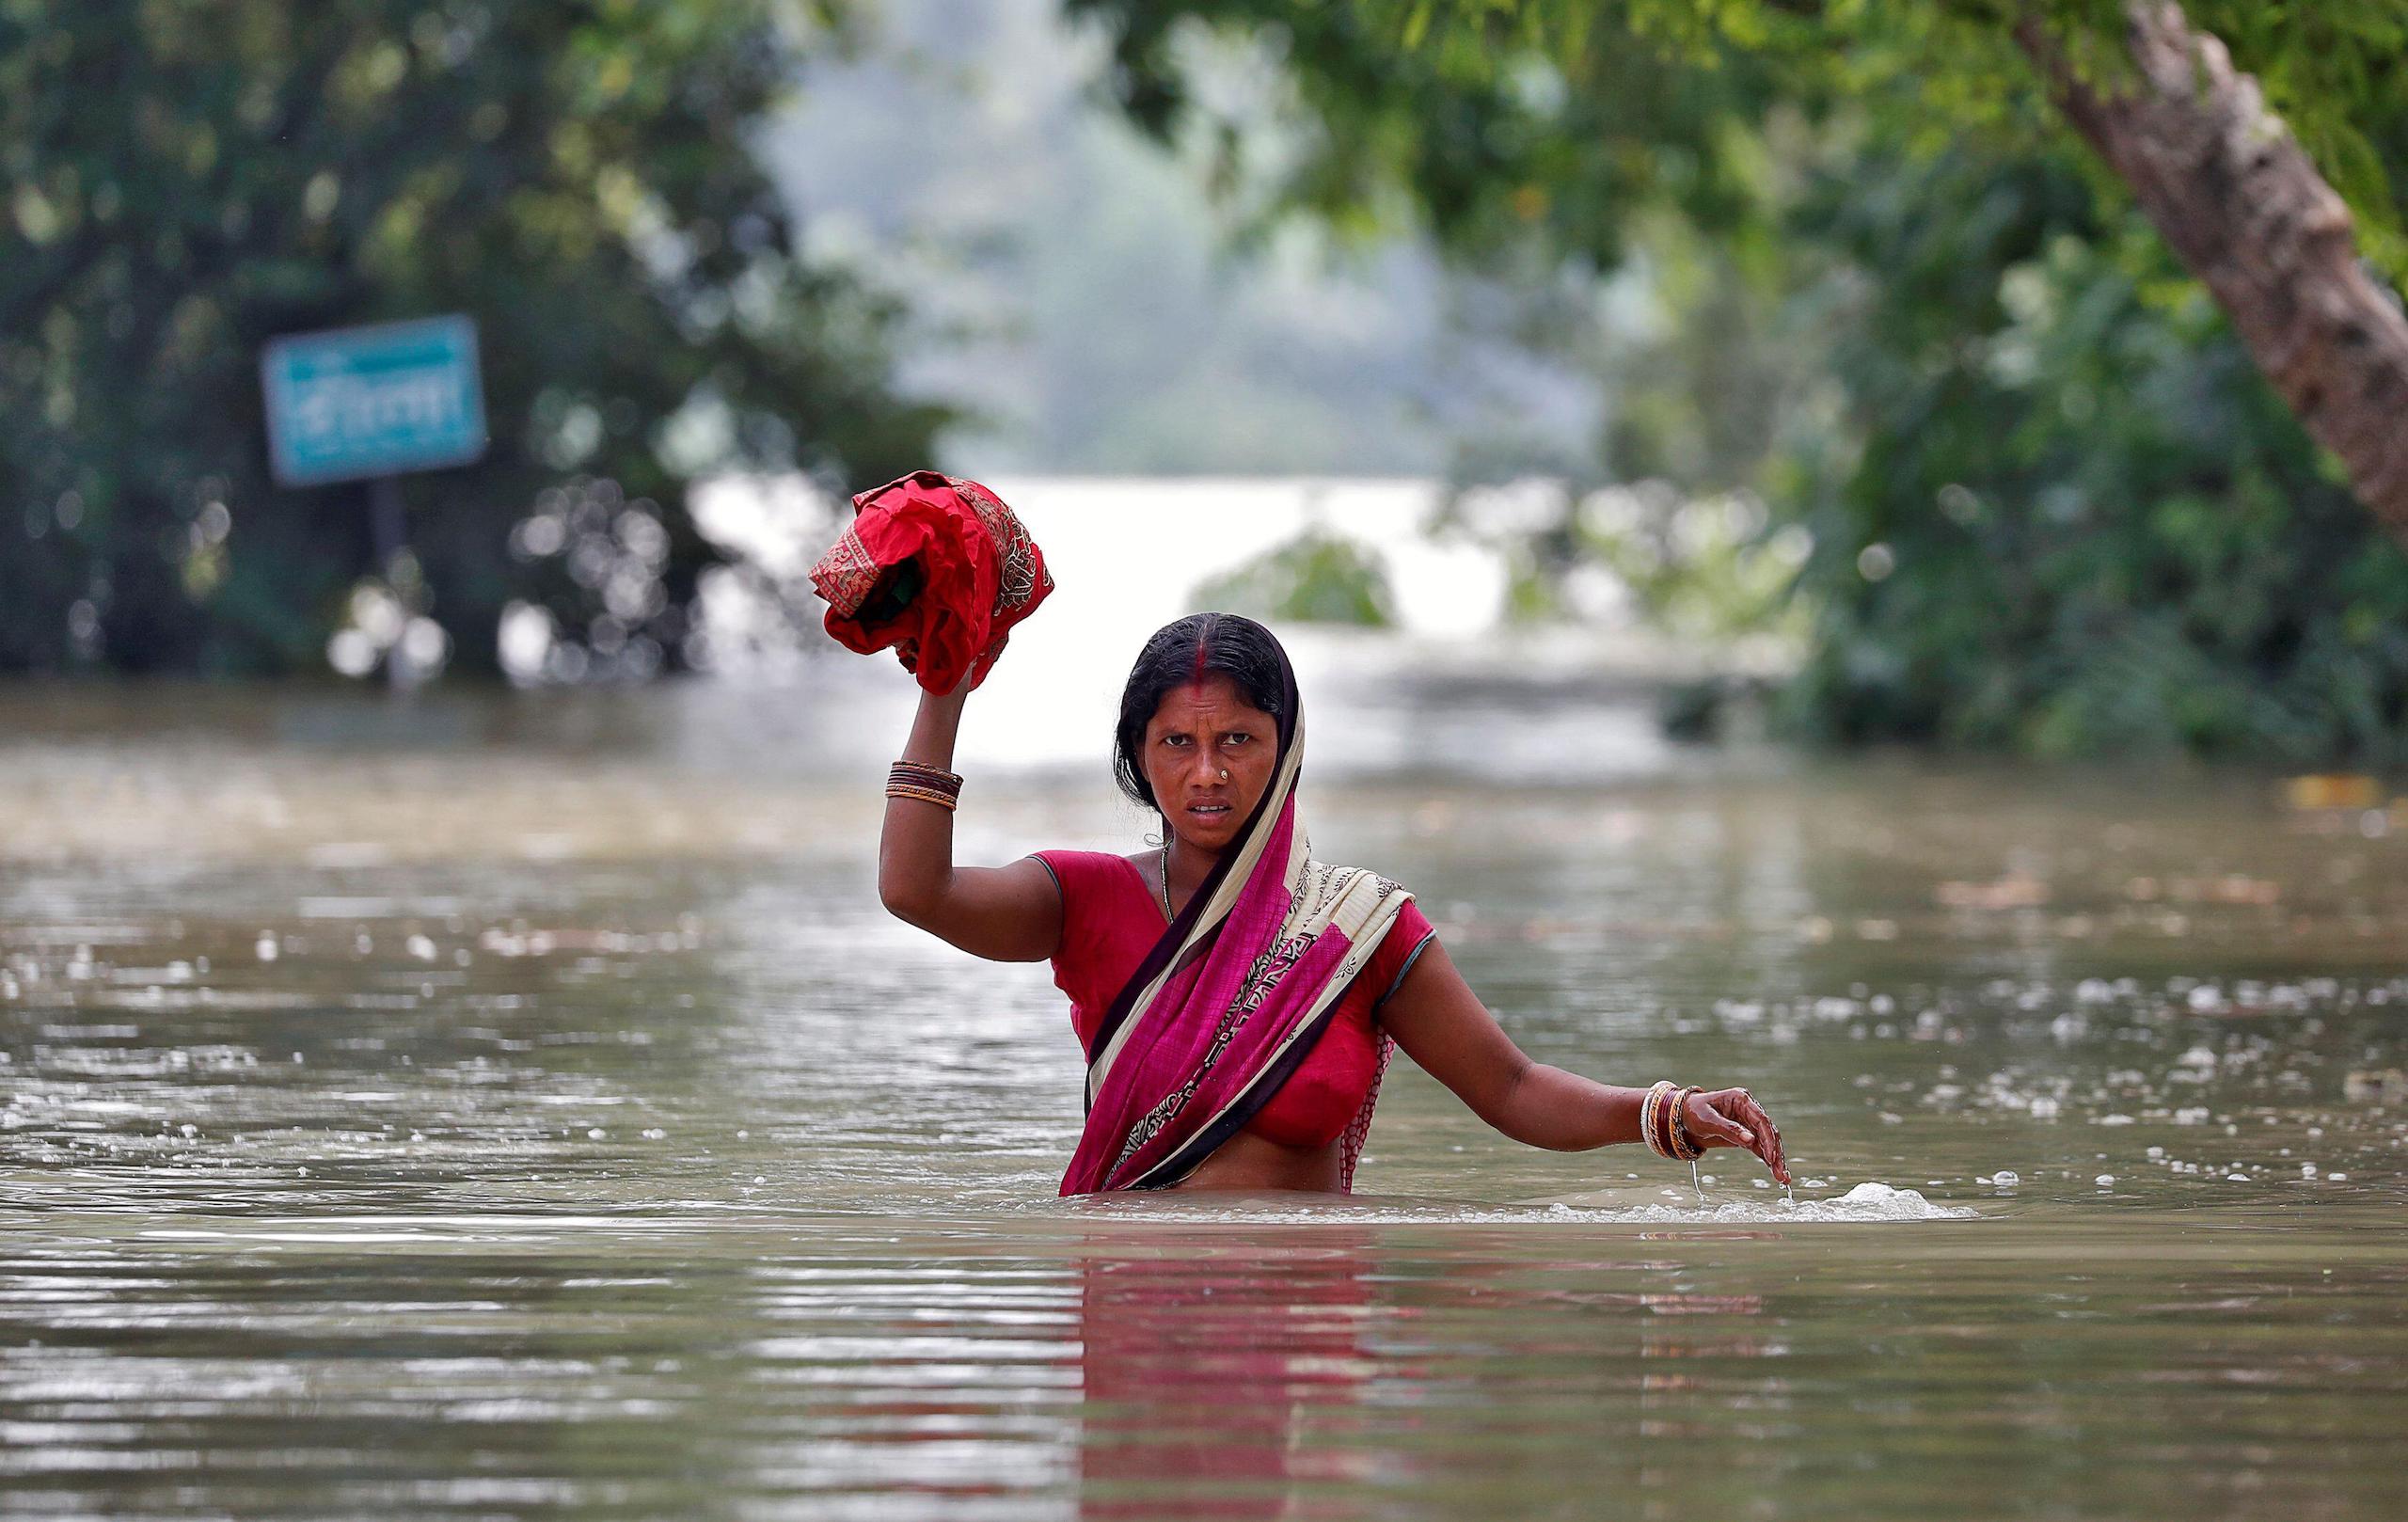 <p>A woman wades through a flooded village in Bihar, August 2017. Annual floods, exacerbated by climate change, have massive impacts on the Indian state, which are felt particularly acutely by women from poor and marginalised communities. (Image: Cathal McNaughton / Alamy)</p>